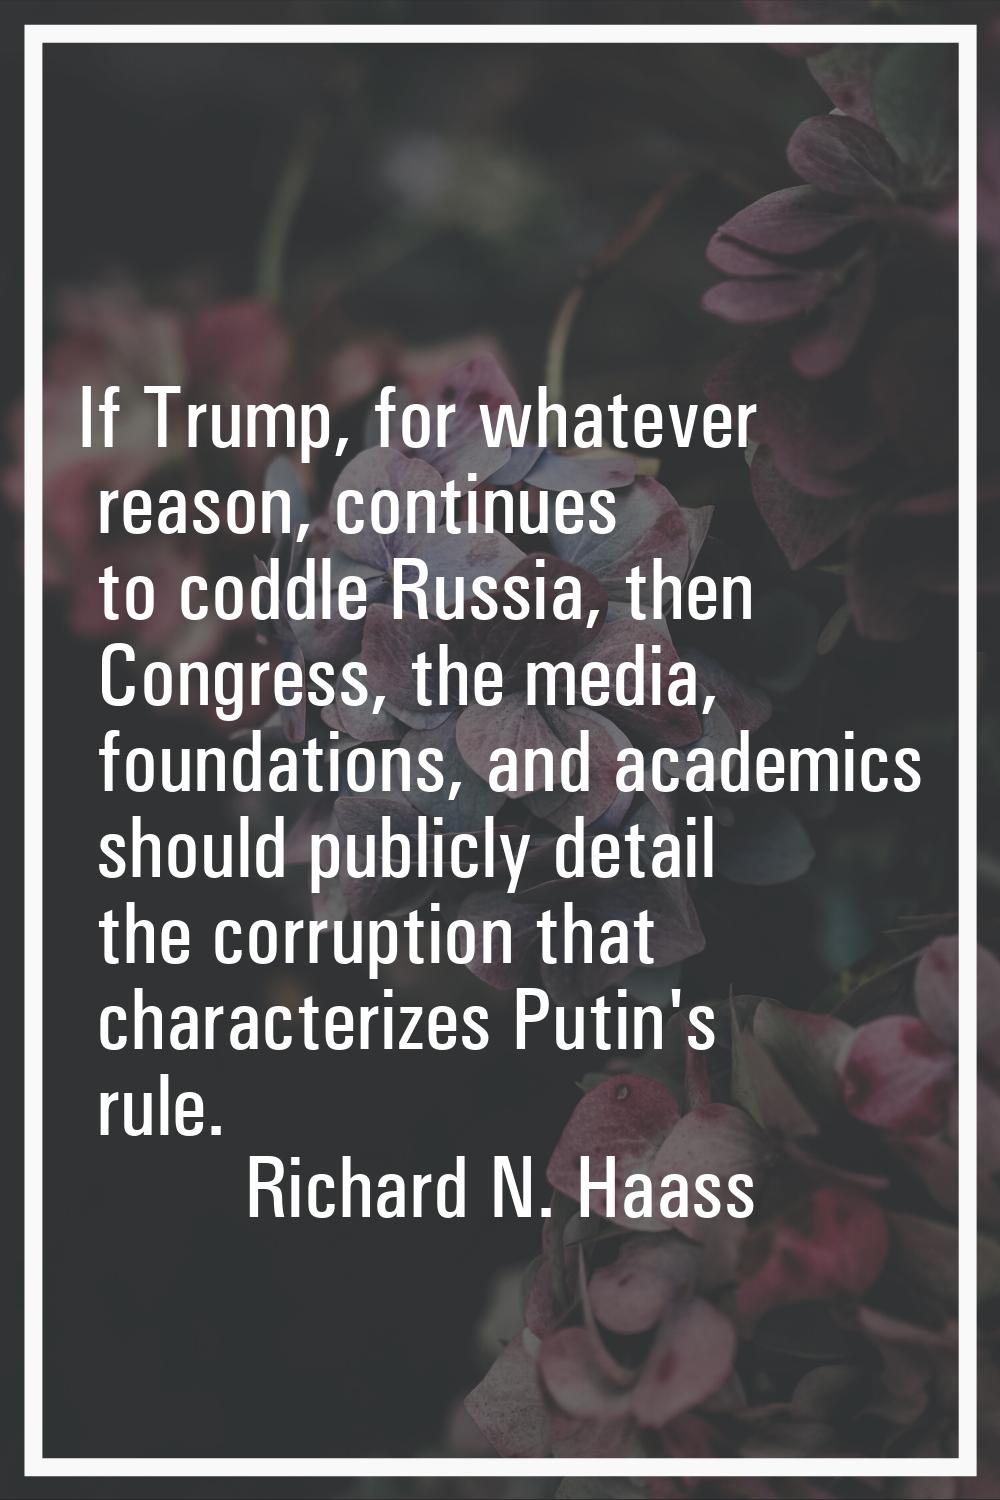 If Trump, for whatever reason, continues to coddle Russia, then Congress, the media, foundations, a